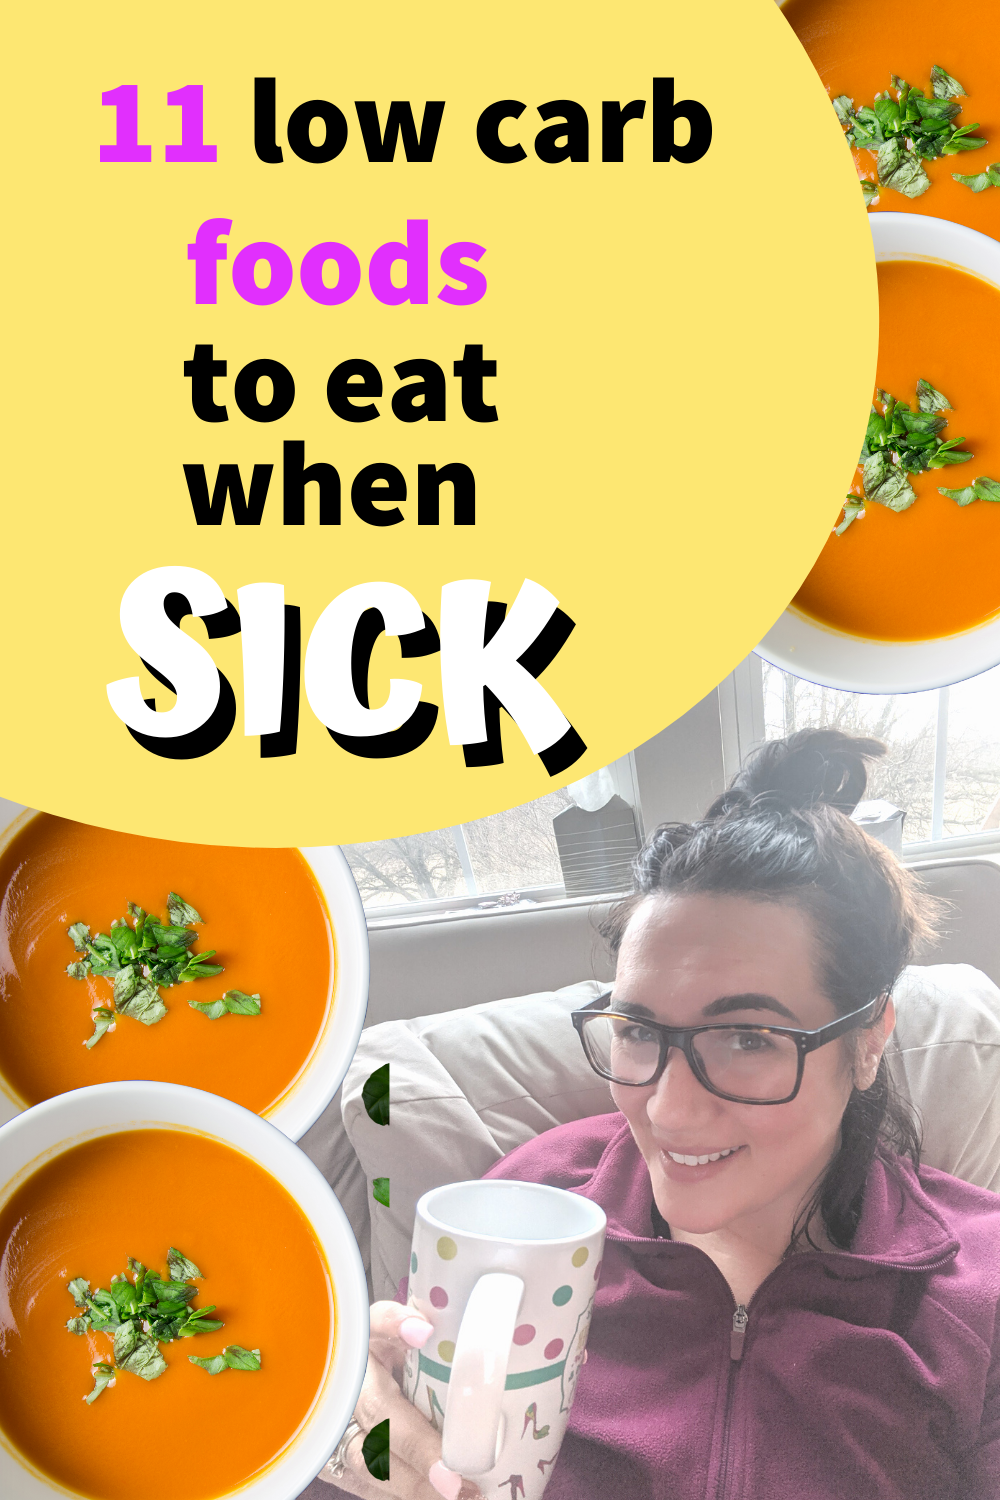 Foods To Eat When Sick